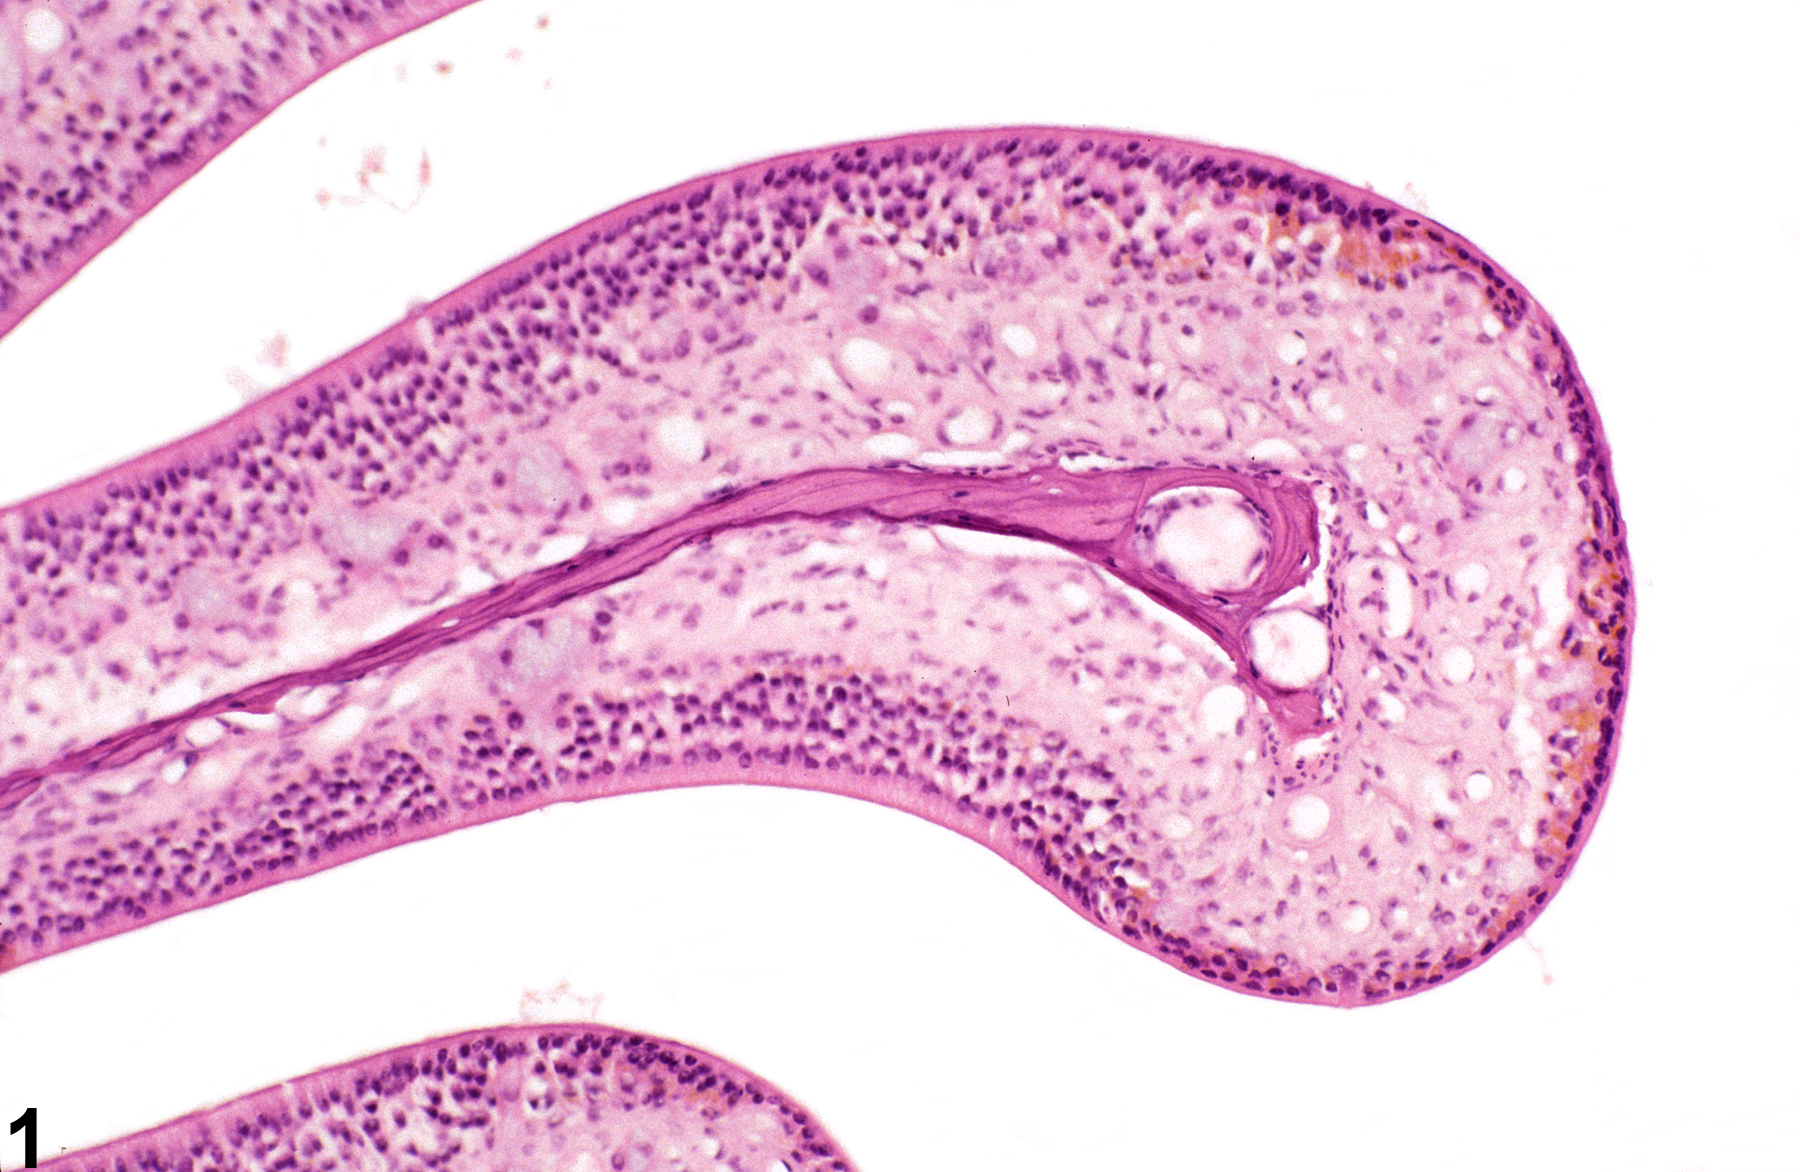 Image of atrophy in the nose, olfactory epithelium from a female B6C3F1/N mouse in a chronic study